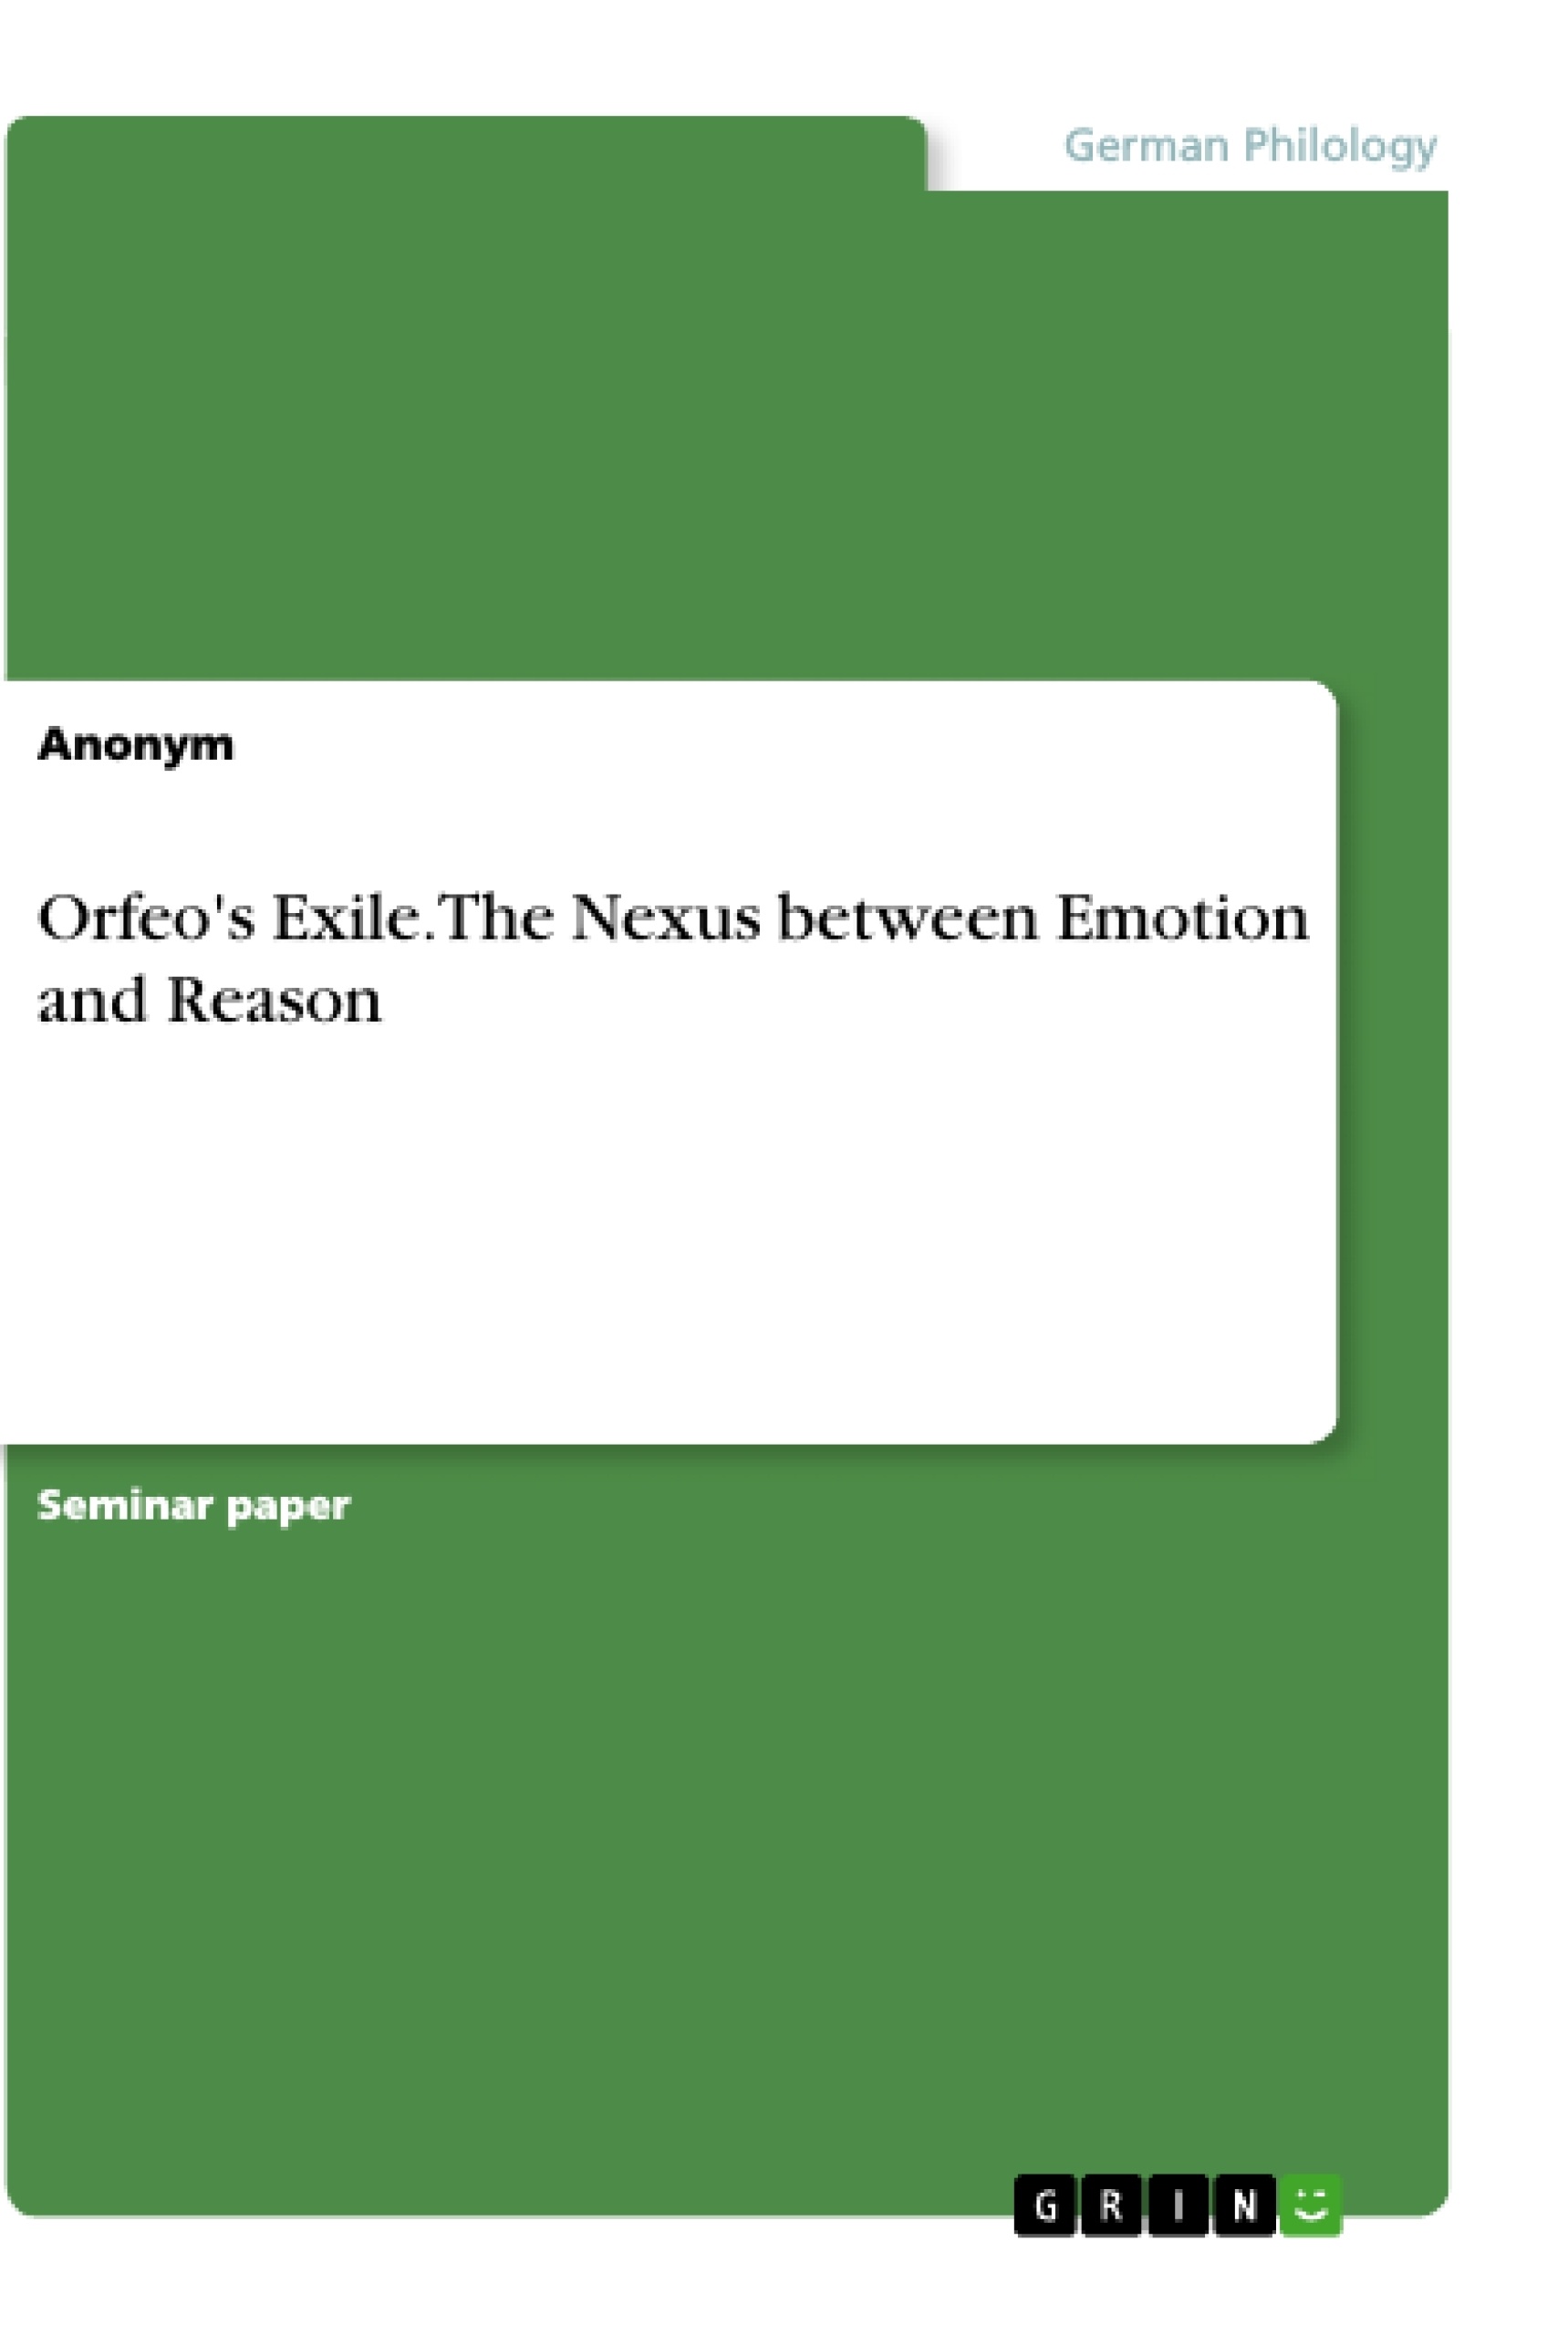 Title: Orfeo's Exile. The Nexus between Emotion and Reason